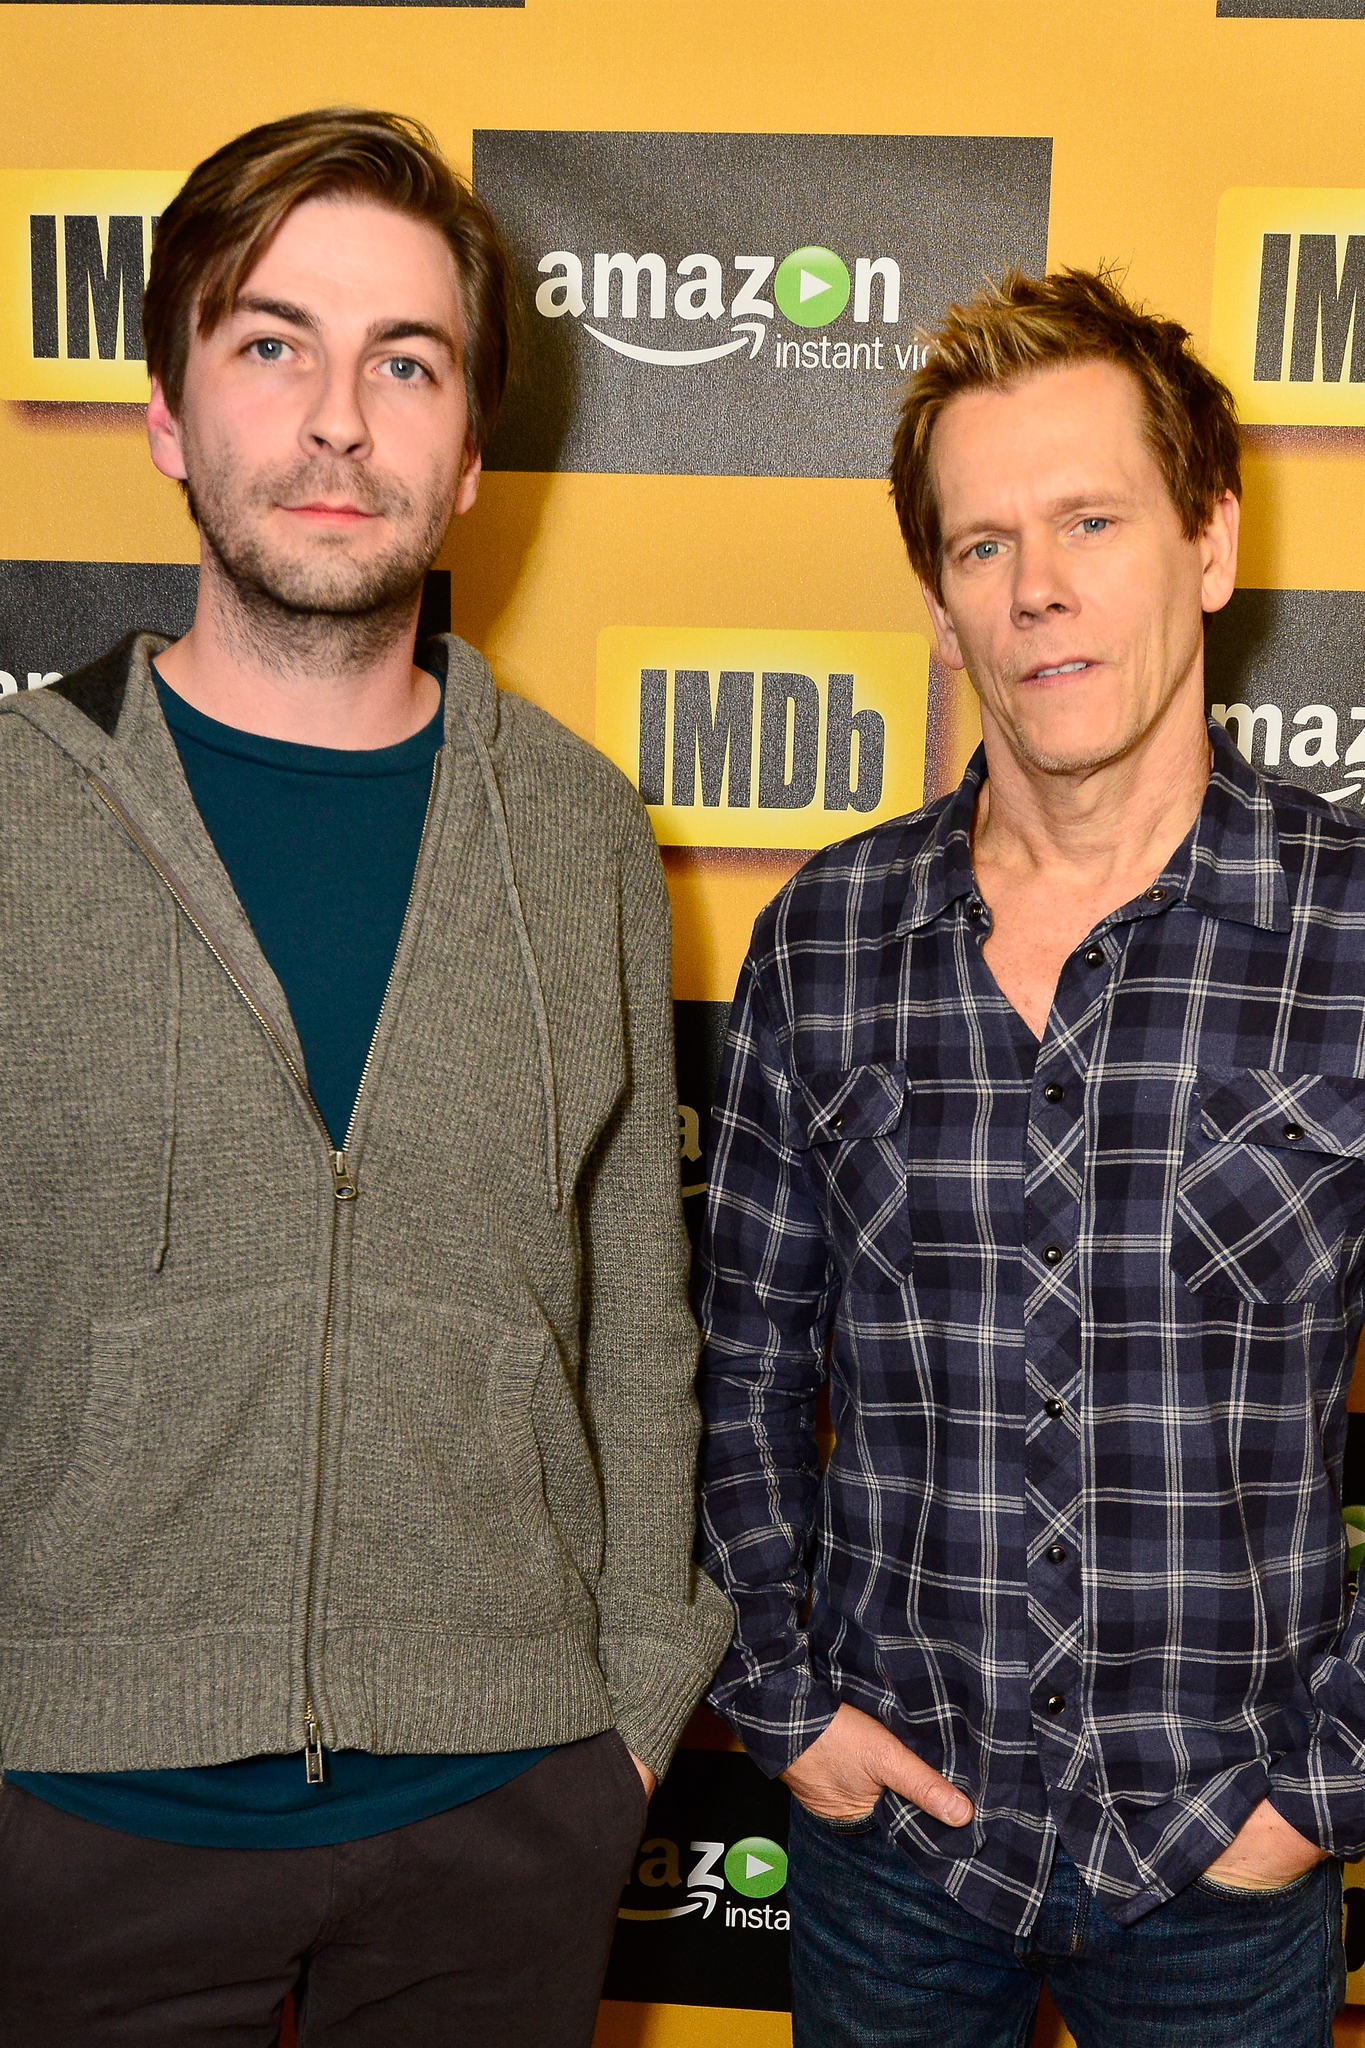 Kevin Bacon and Jon Watts at event of The IMDb Studio (2015)